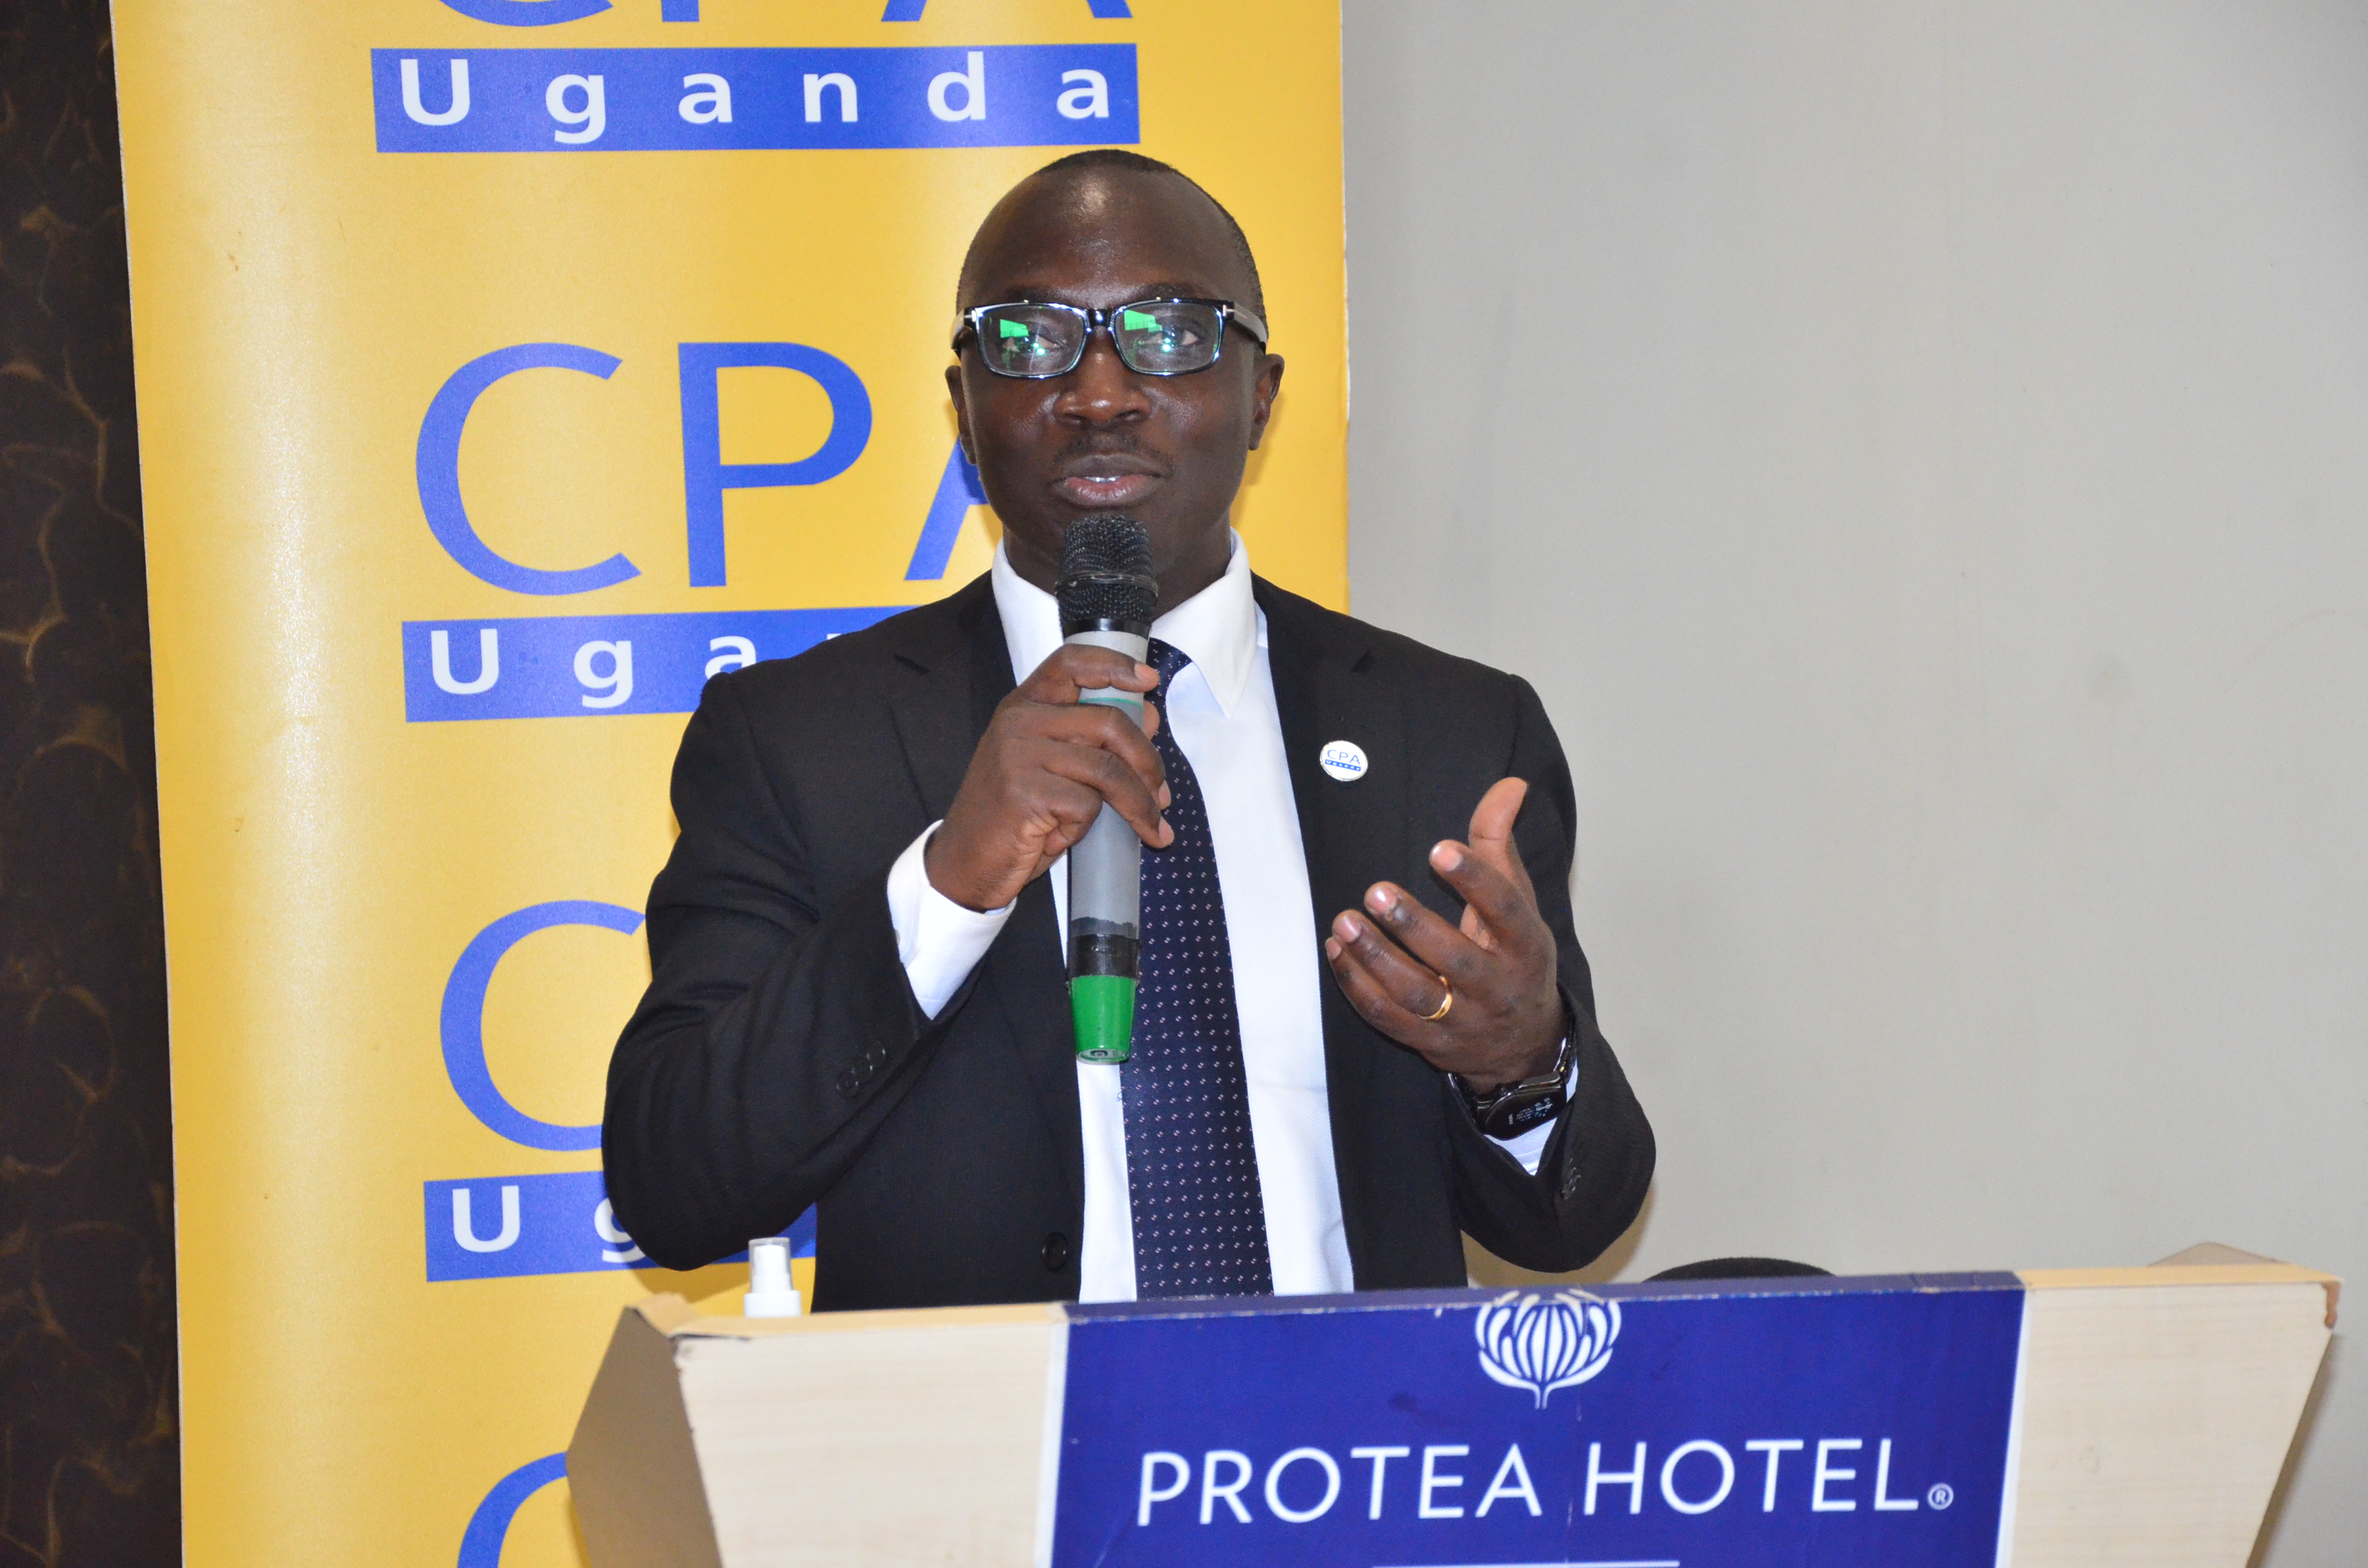 CPA Charles Lutimba, the Director Standards ICPAU addresses journalists at the FiRe Awards press briefing held at Protea Hotel, Skyz, Naguru